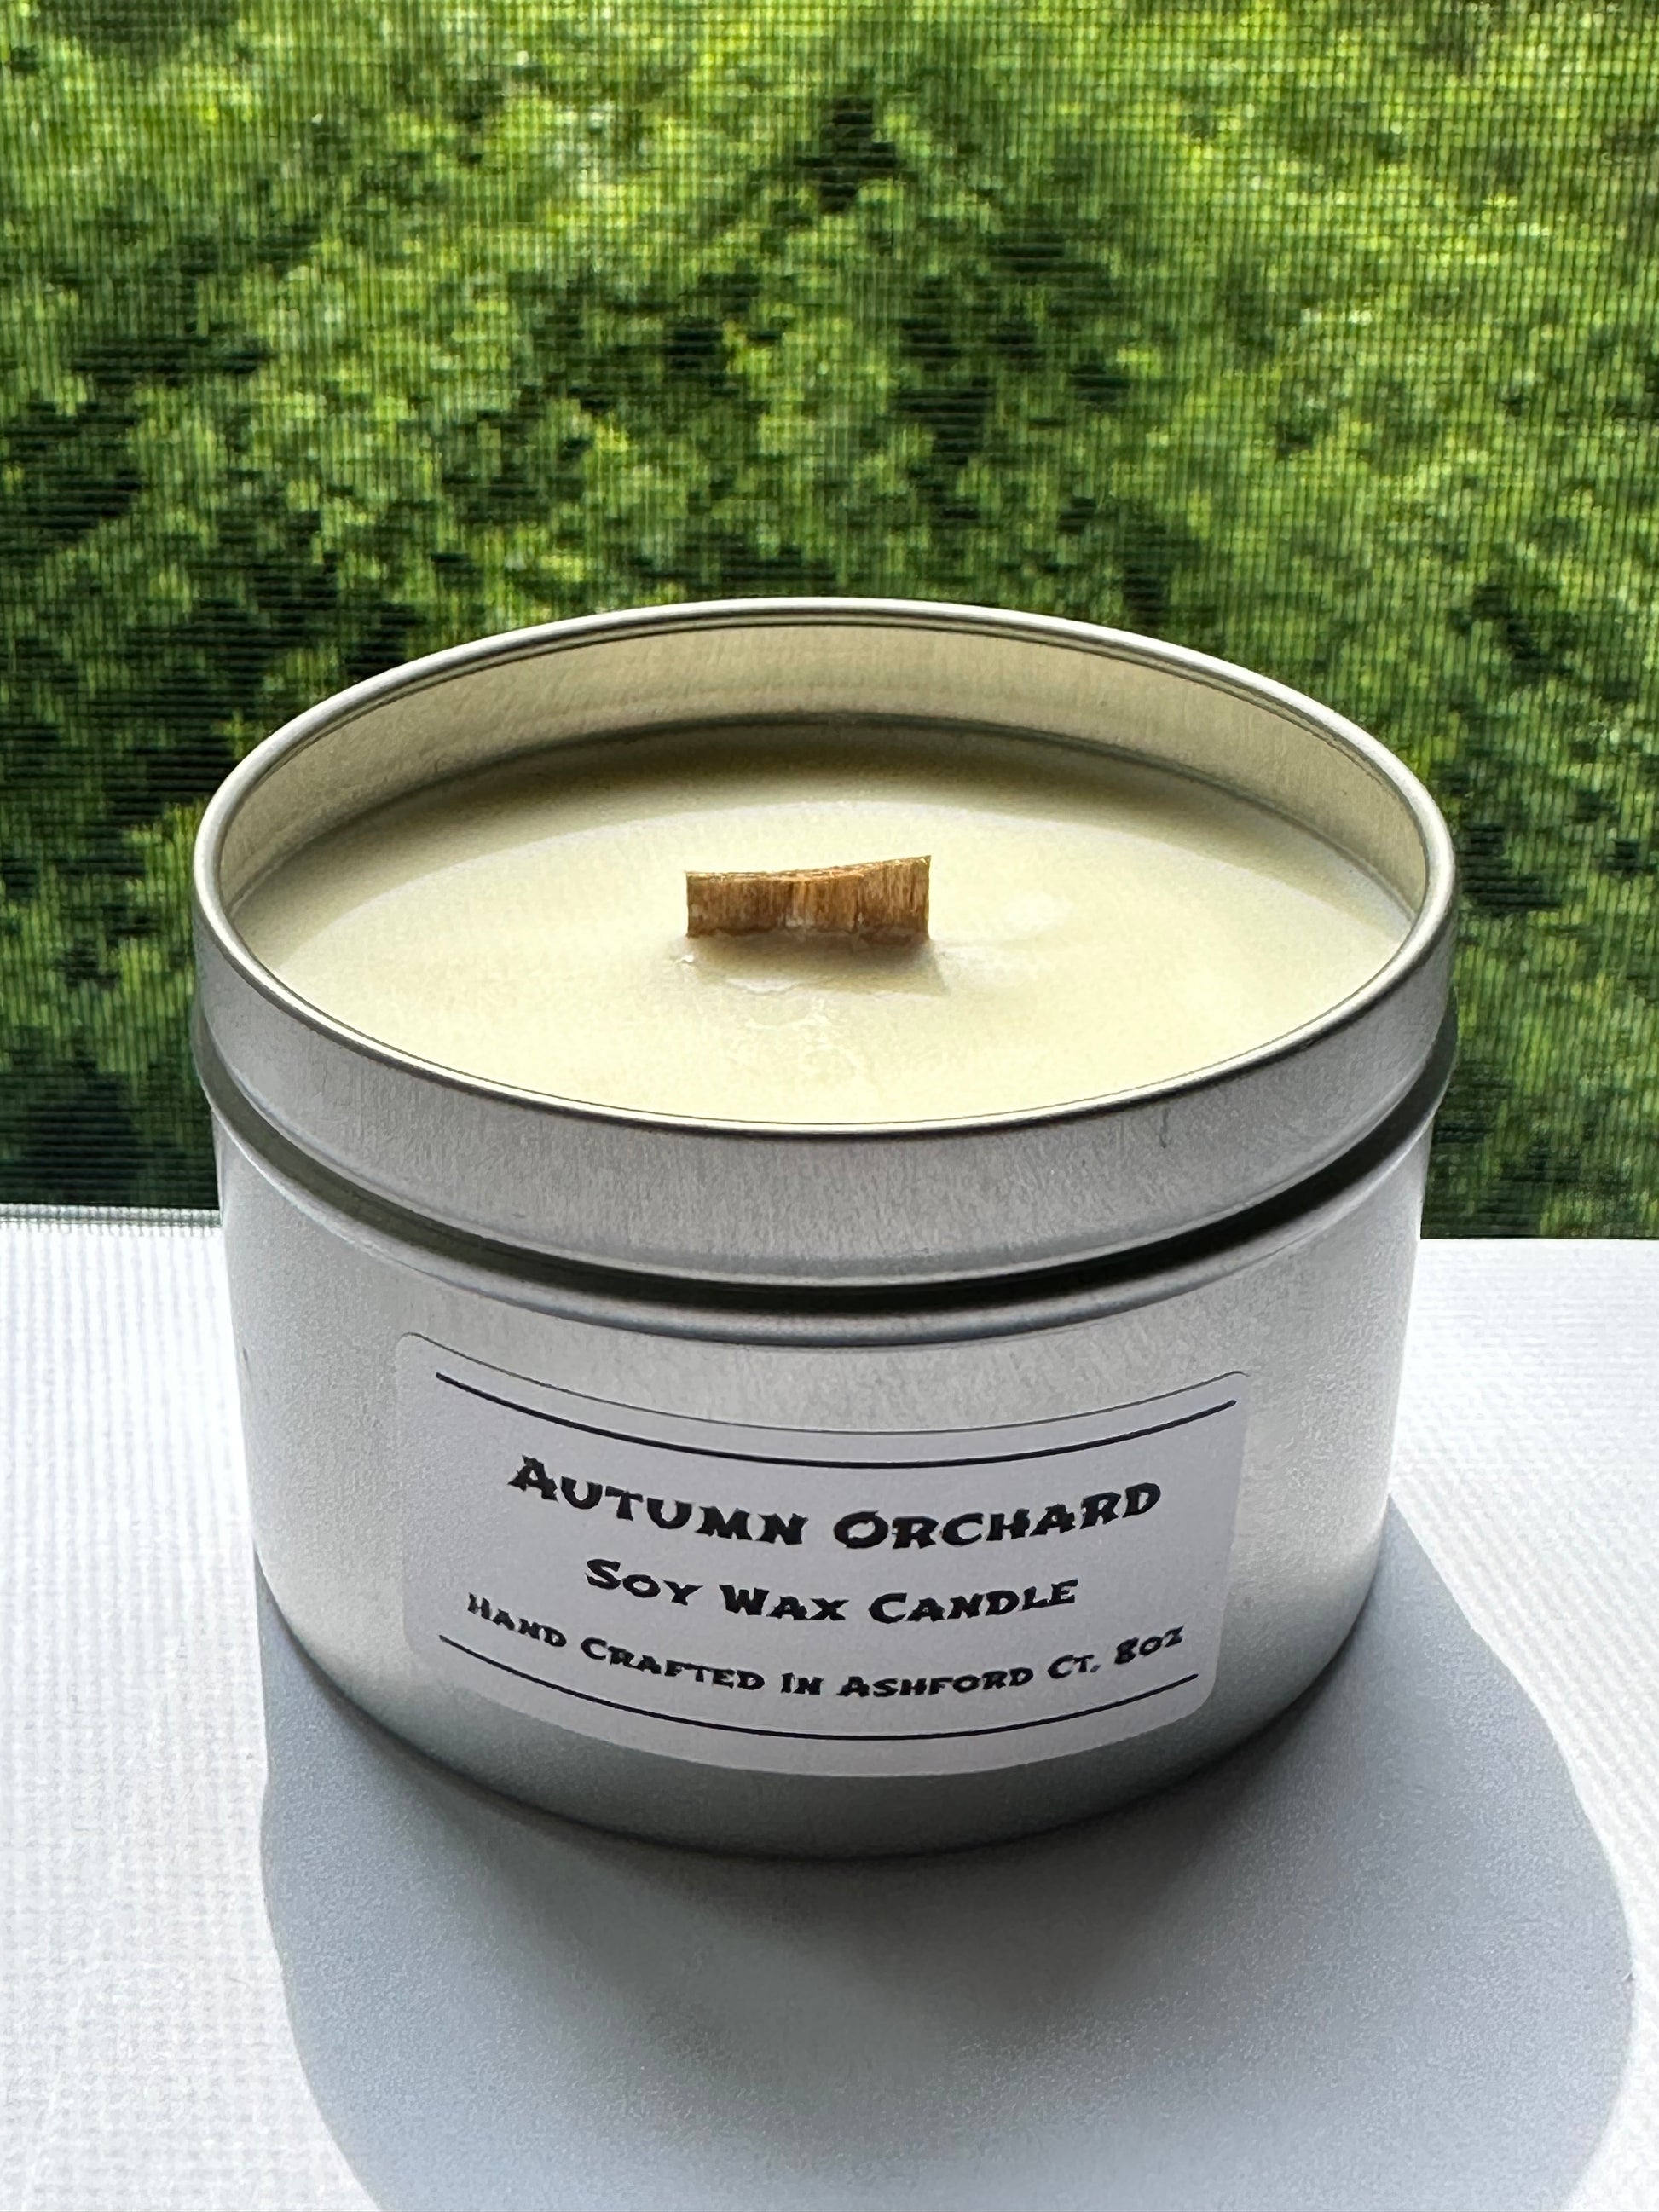 8oz. Northern Lights  Soy Wooden Wick Candles – Kinsley Mae Candle co.